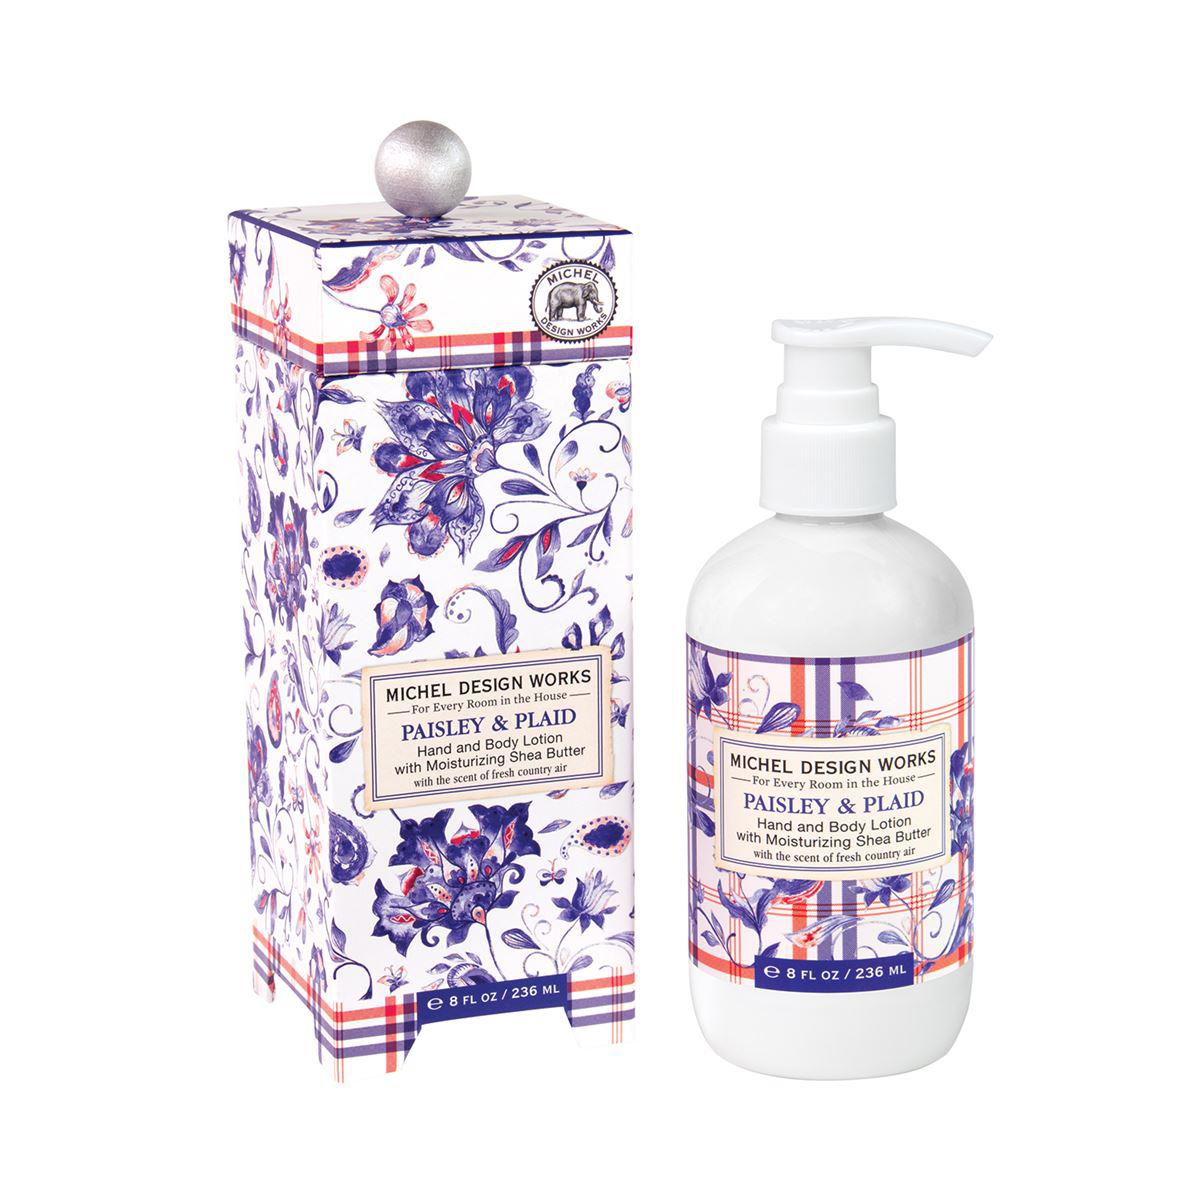 Michel Design Works Hand & Body Lotion - Paisley & Plaid - BeautyOfASite - Central Illinois Gifts, Fashion & Beauty Boutique